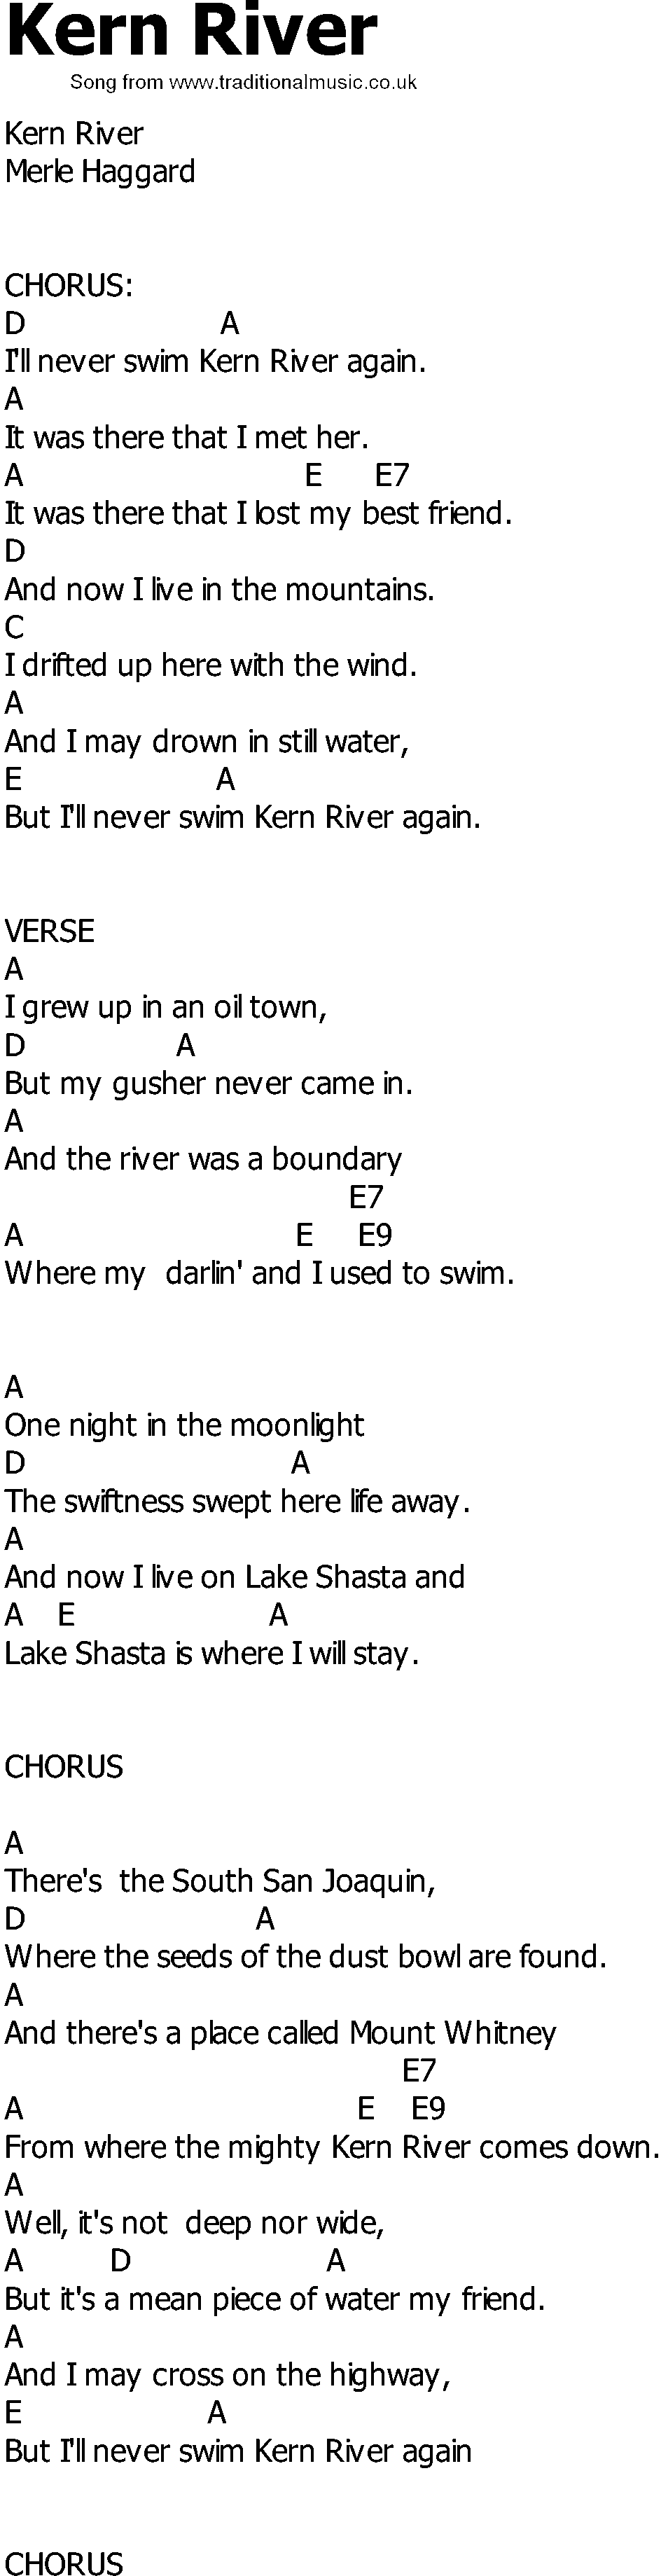 Old Country song lyrics with chords - Kern River